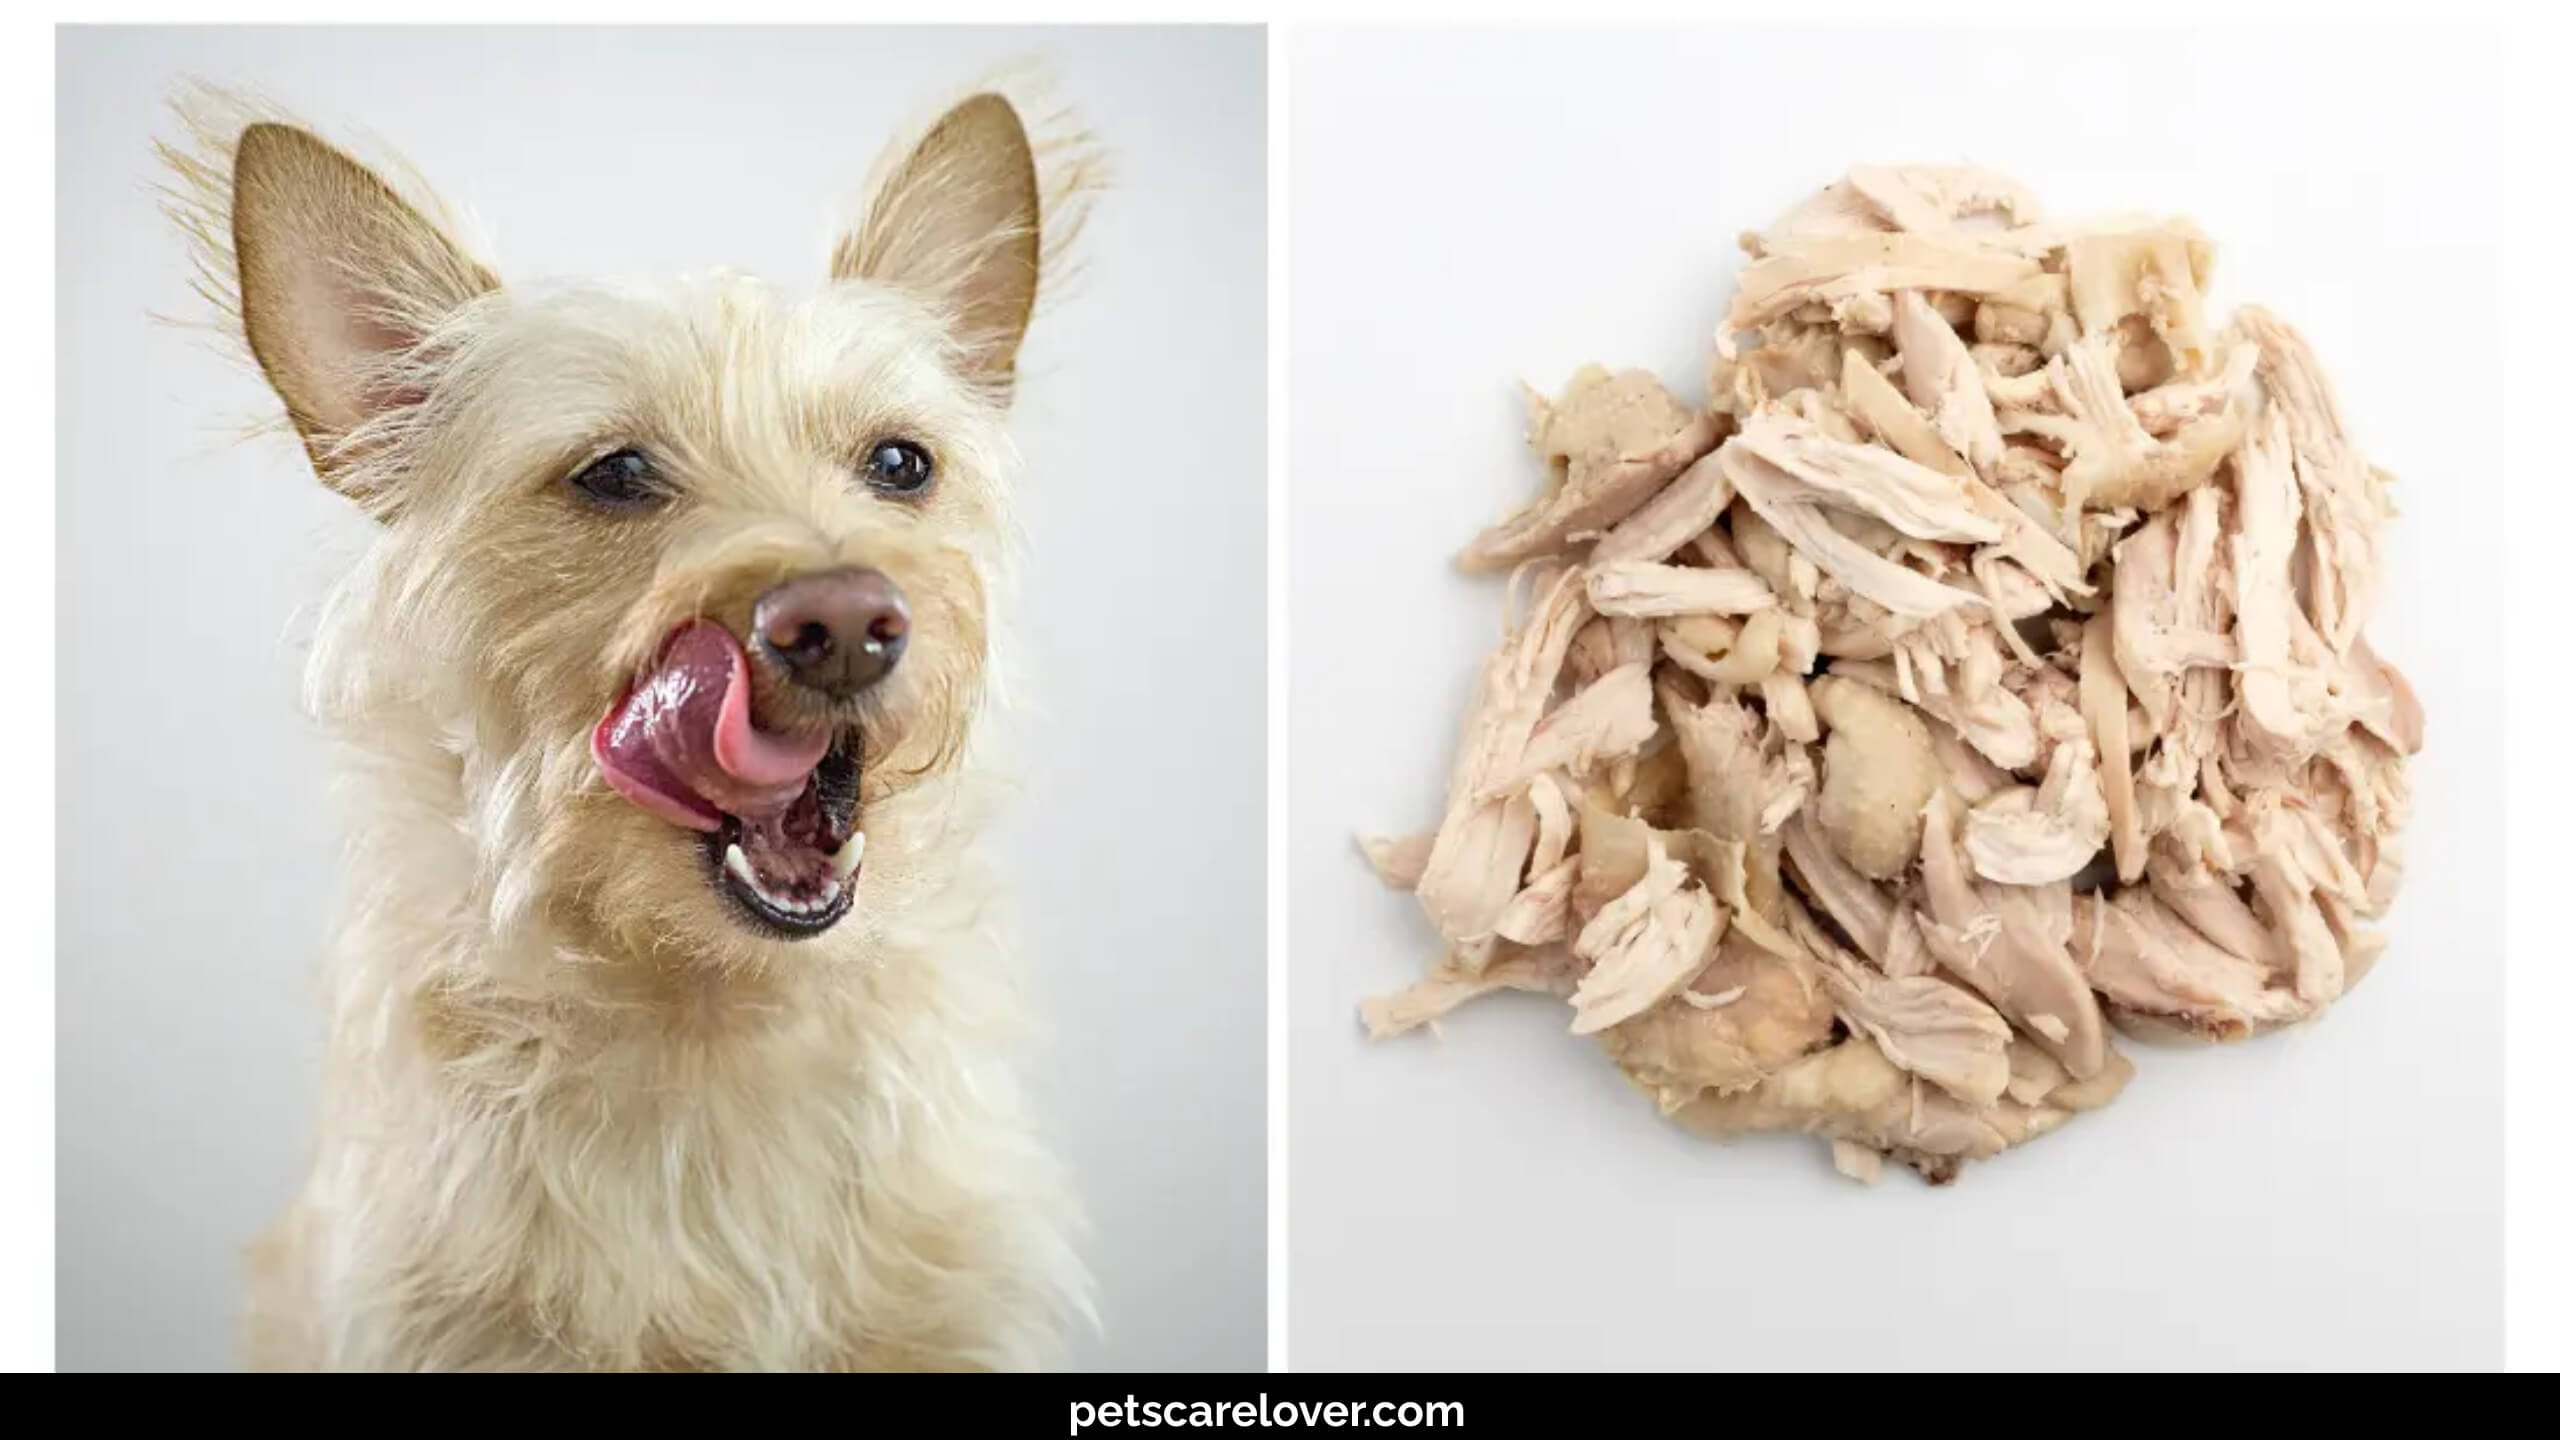 How to Boil Chicken for Dogs